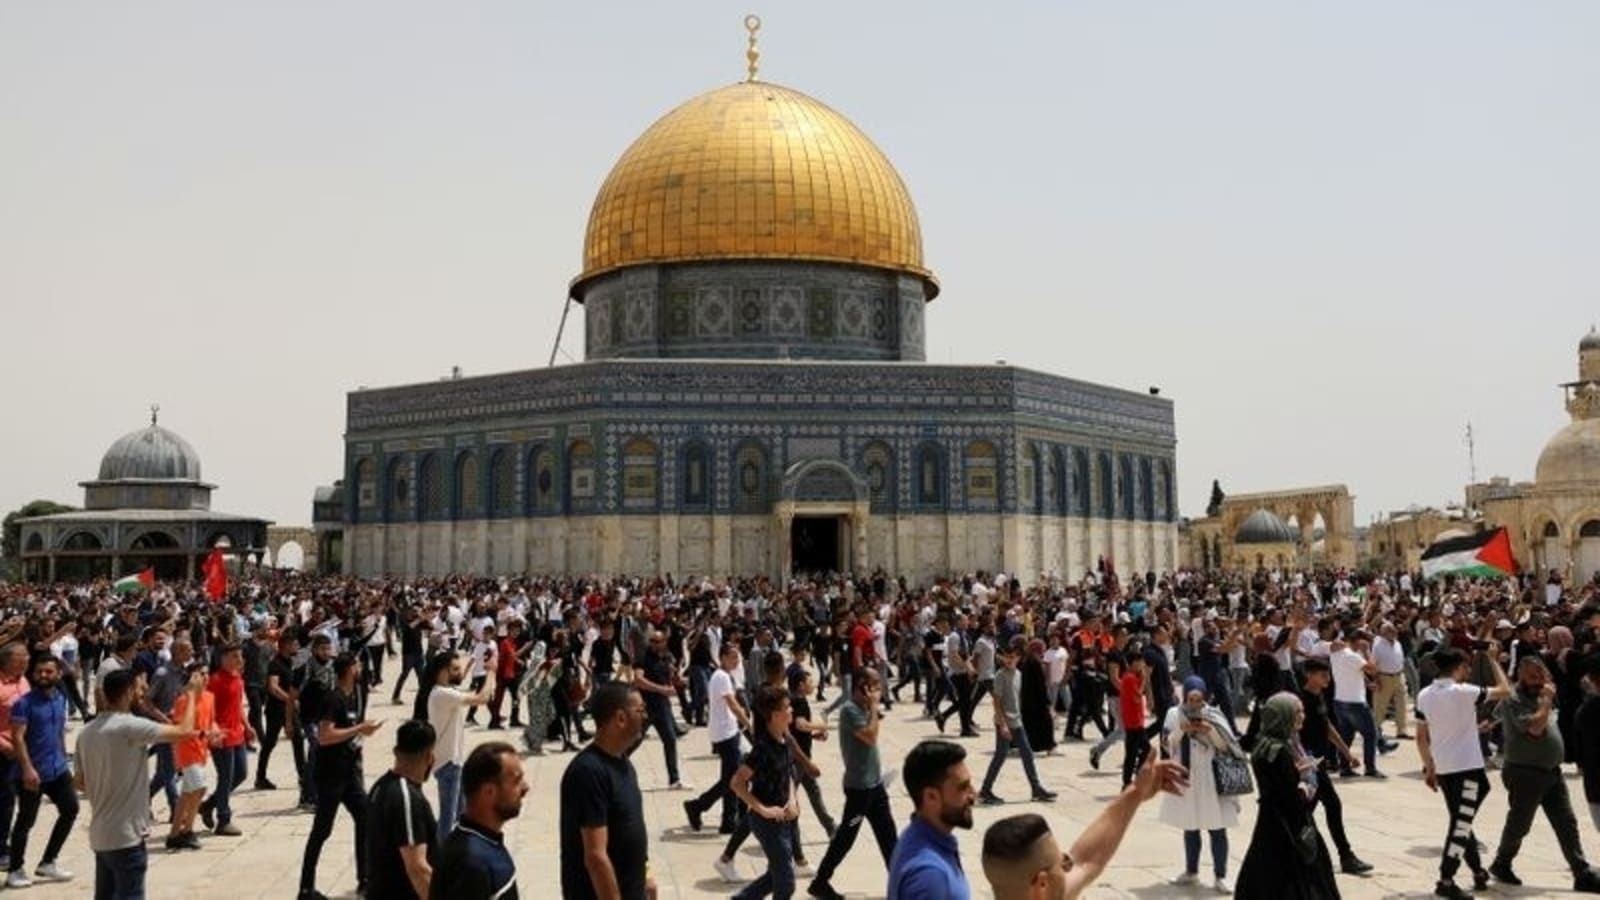 Jerusalem's Temple Mount complex opened for Jews for first time in 20